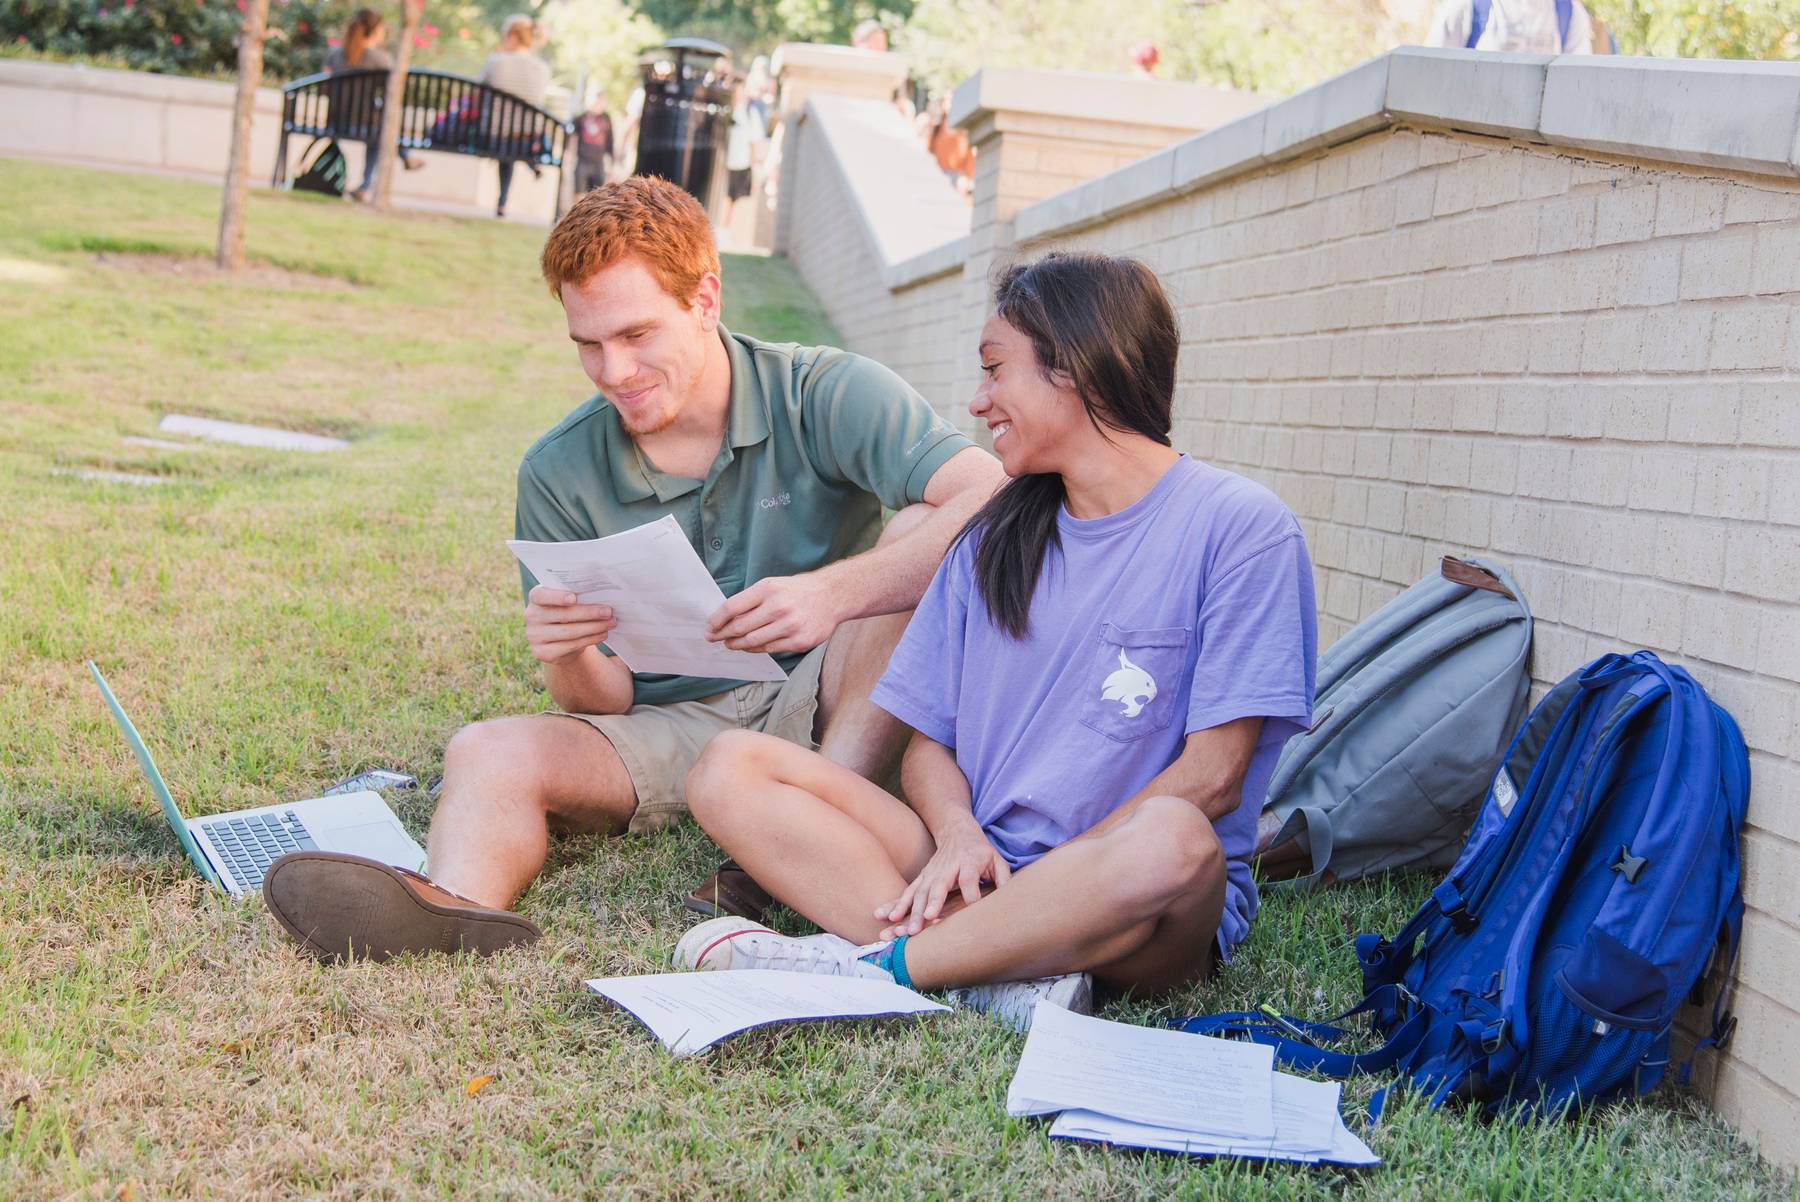 Two students studying while sitting on the grass on a sunny day